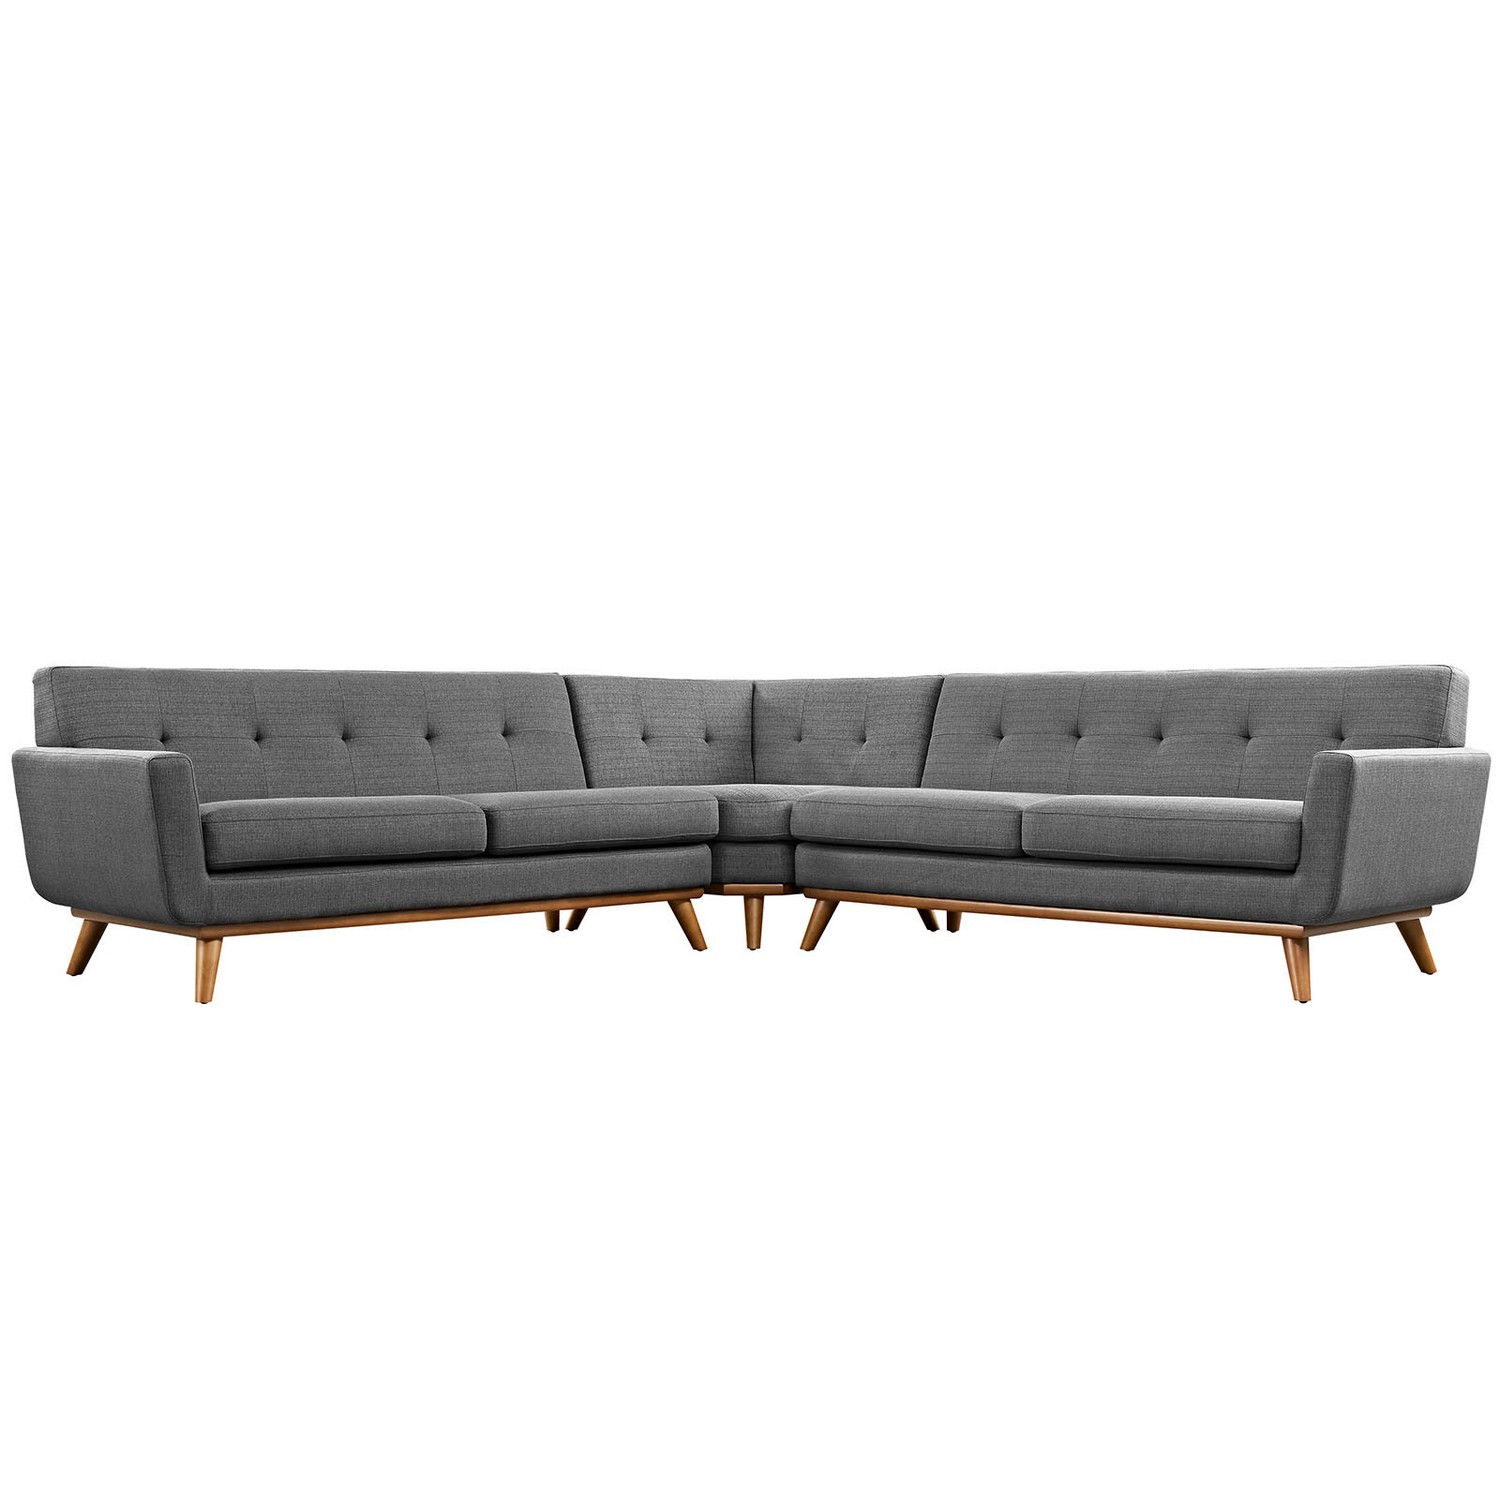 Modway Engage L-Shaped Sectional Sofa - Gray